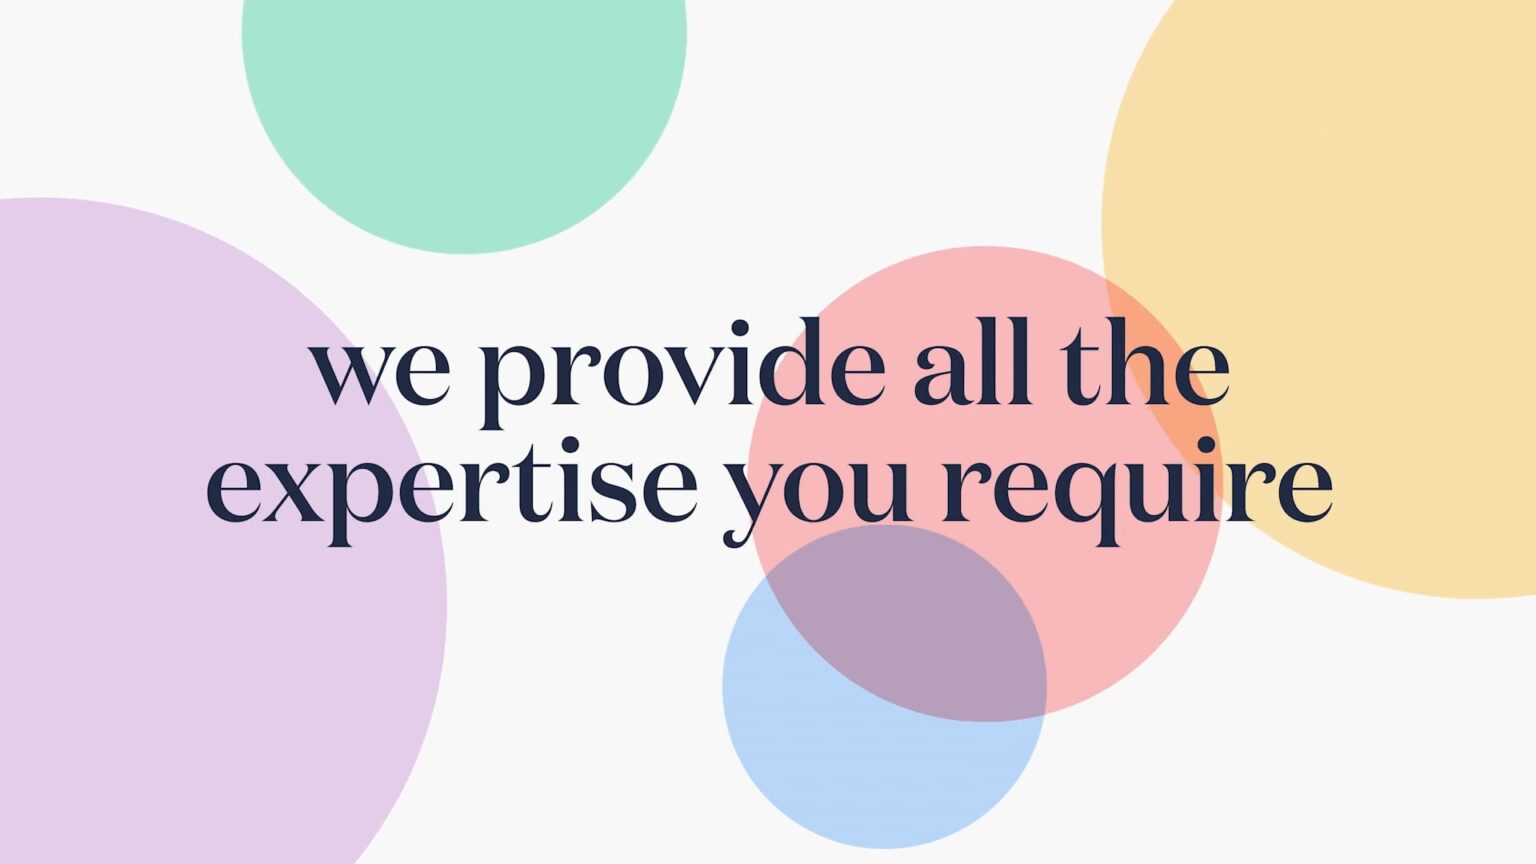 The text "We provide all the expertise you require" on top floating and overlapping bubbles of purple, green, blue, red and yellow.